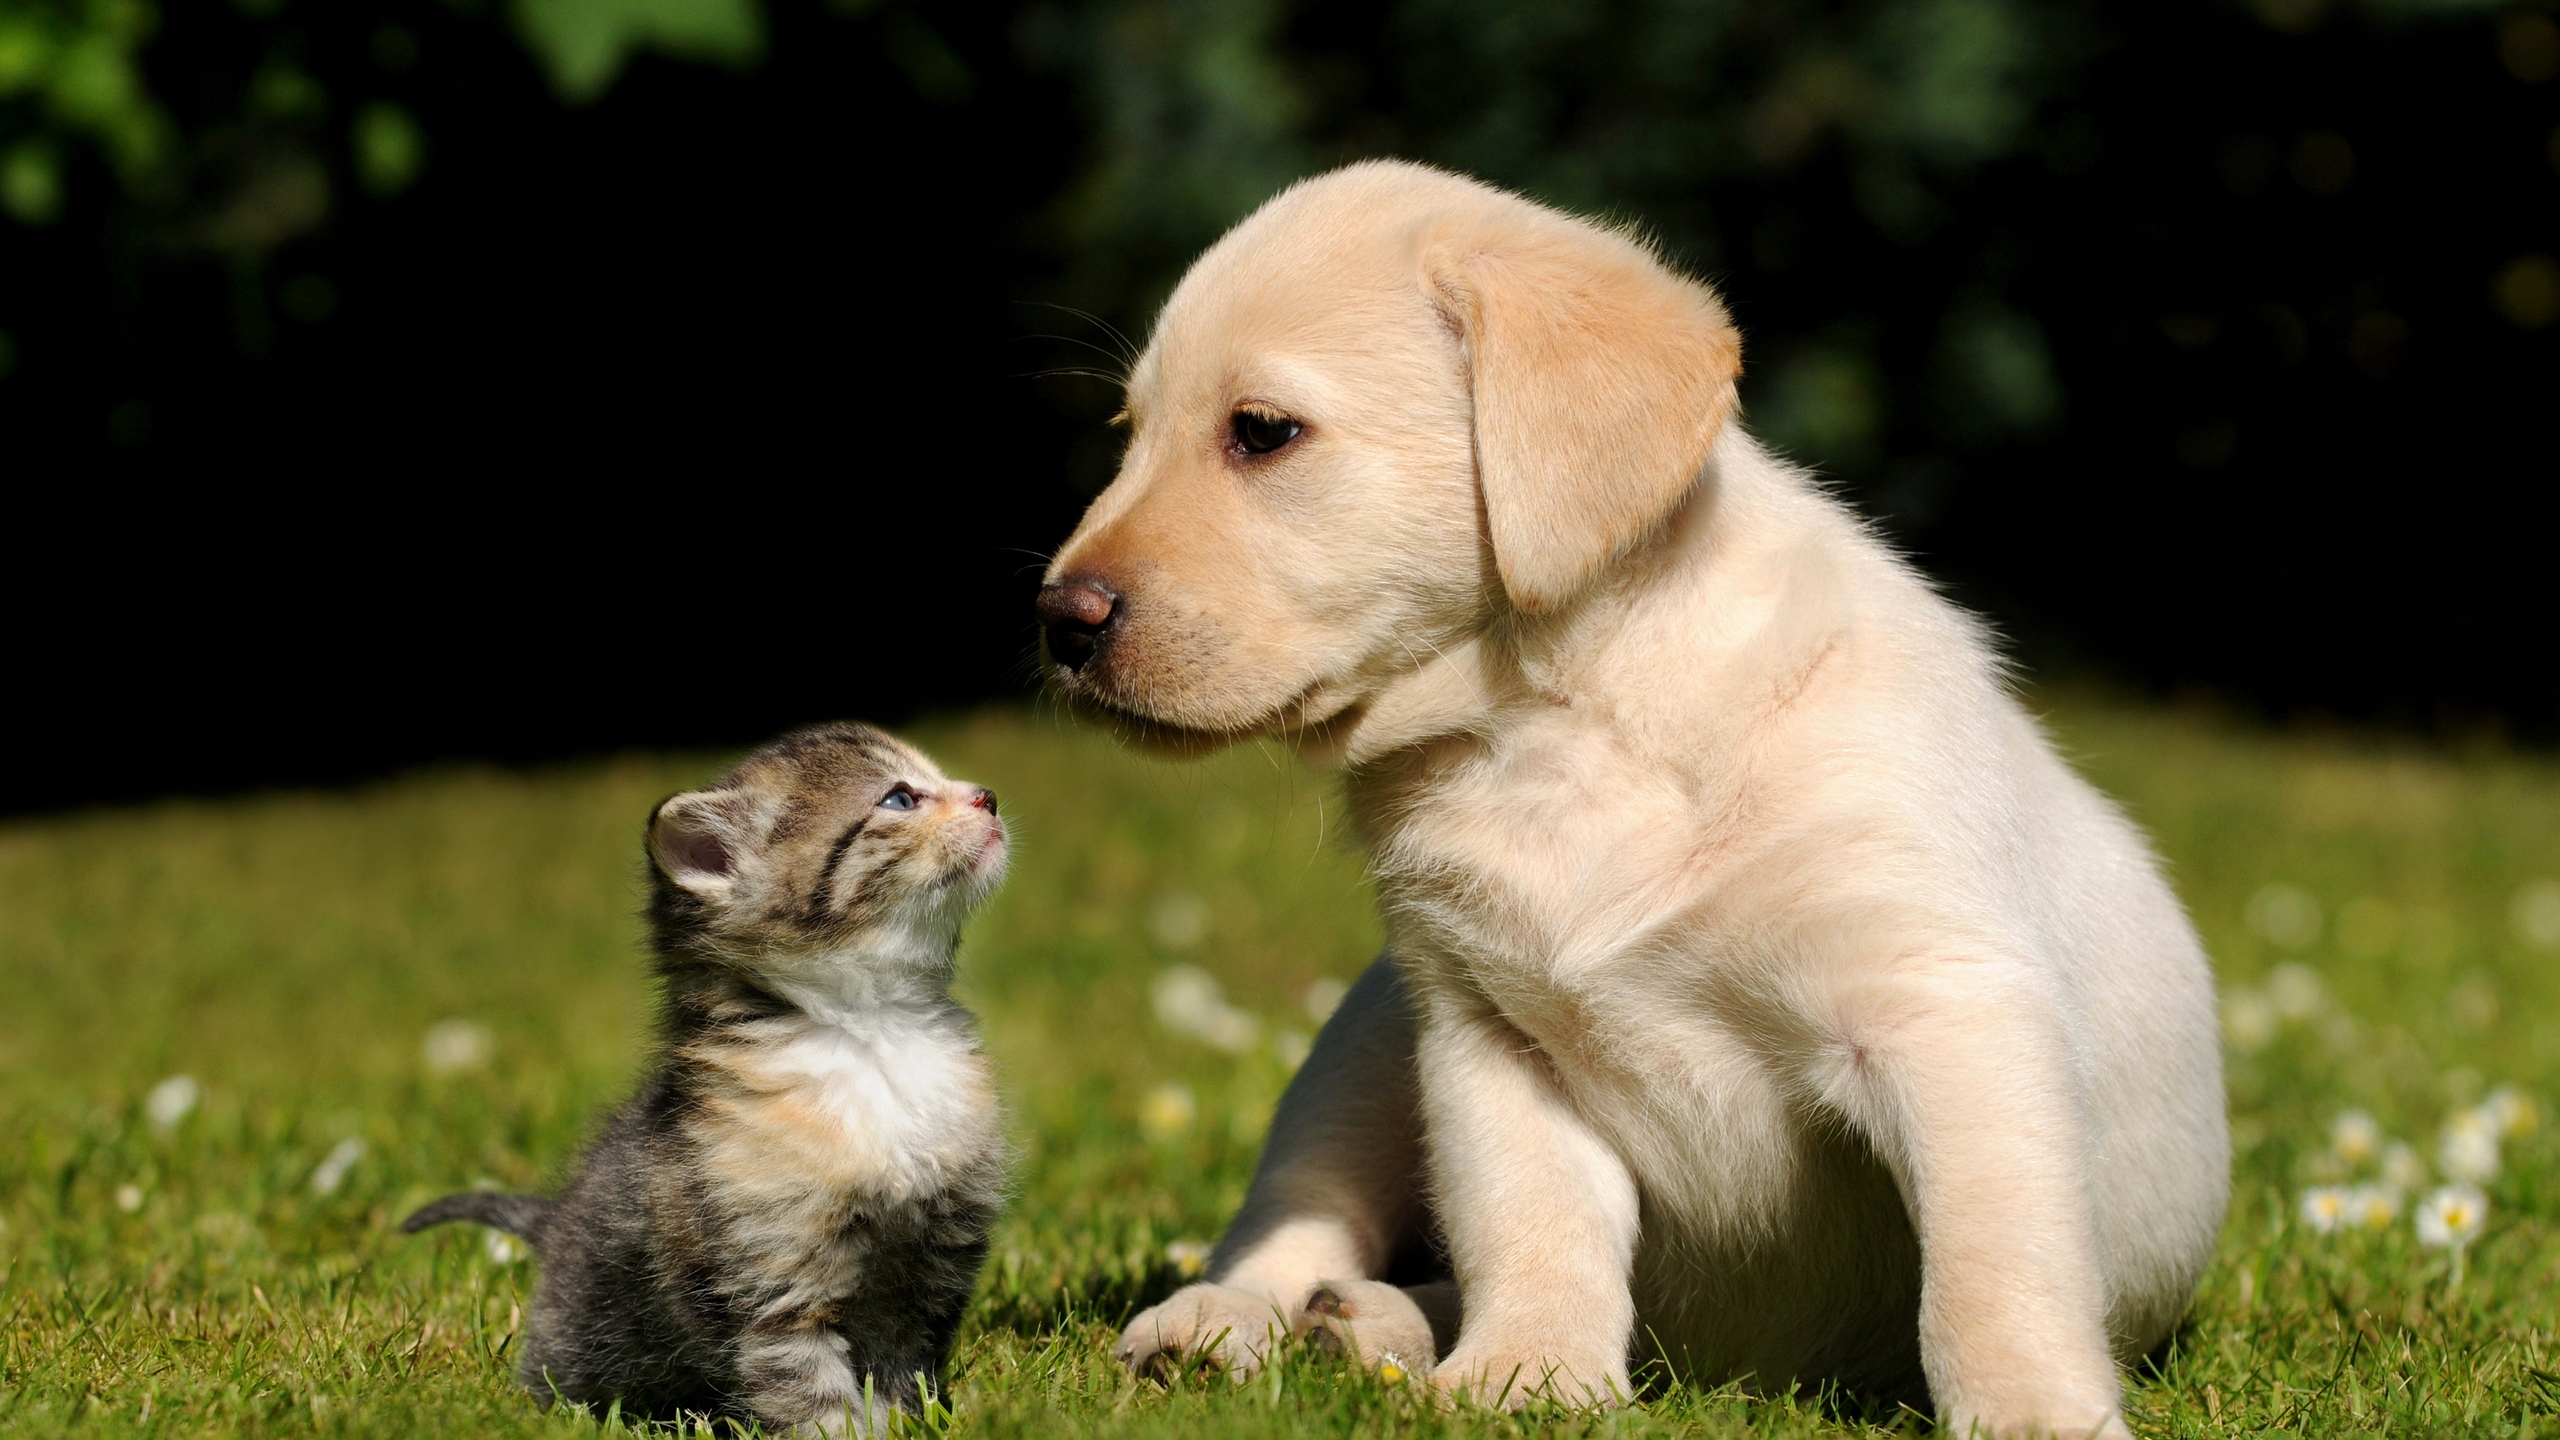 Cute Friends for 2560x1440 HDTV resolution